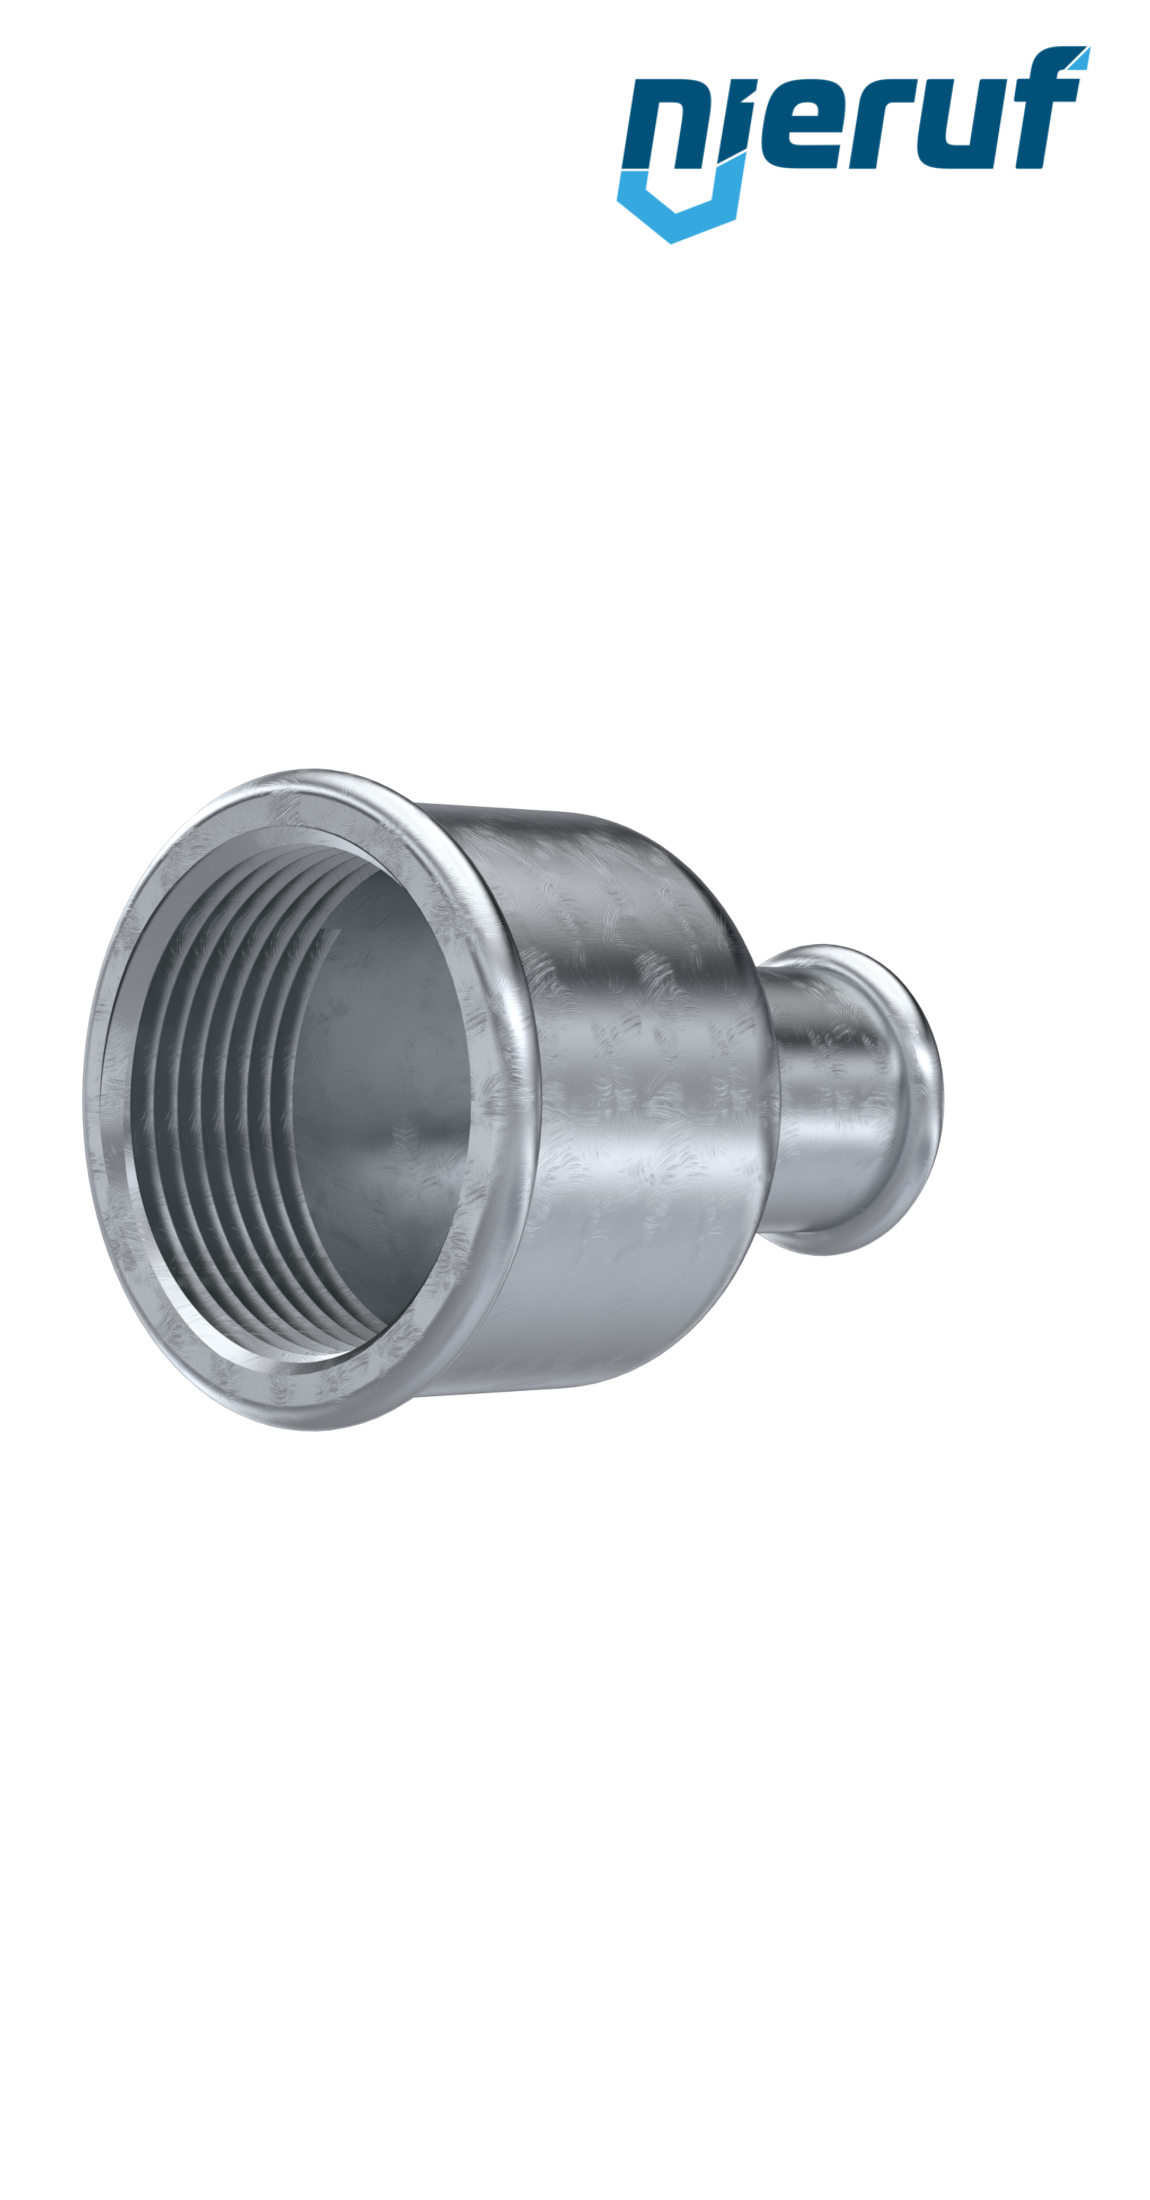 Malleable cast iron fitting reducing socket no. 240, 1 1/2" x 3/4" inch galvanized